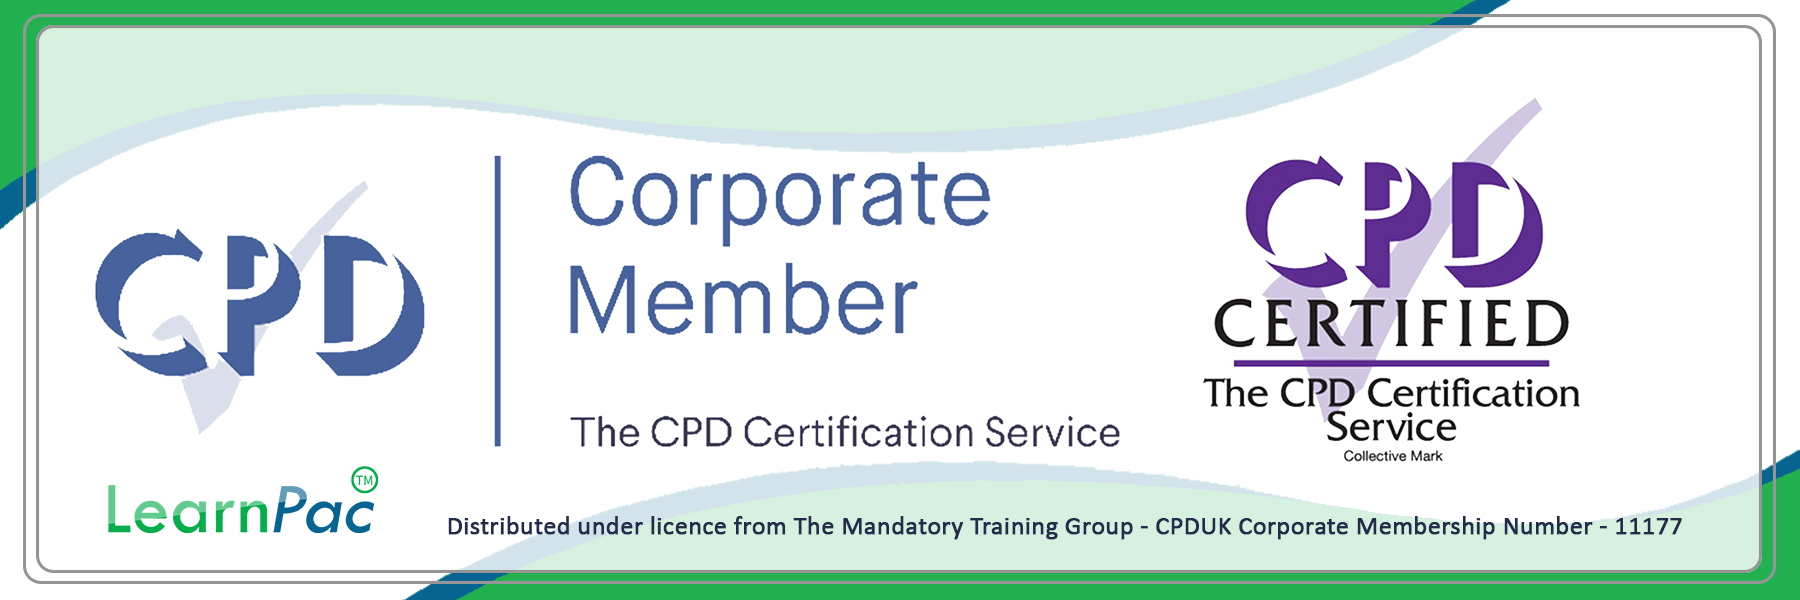 Cardiopulmonary Resuscitation - E-Learning Courses with Certificates - CPD Certified - LearnPac Systems UK -